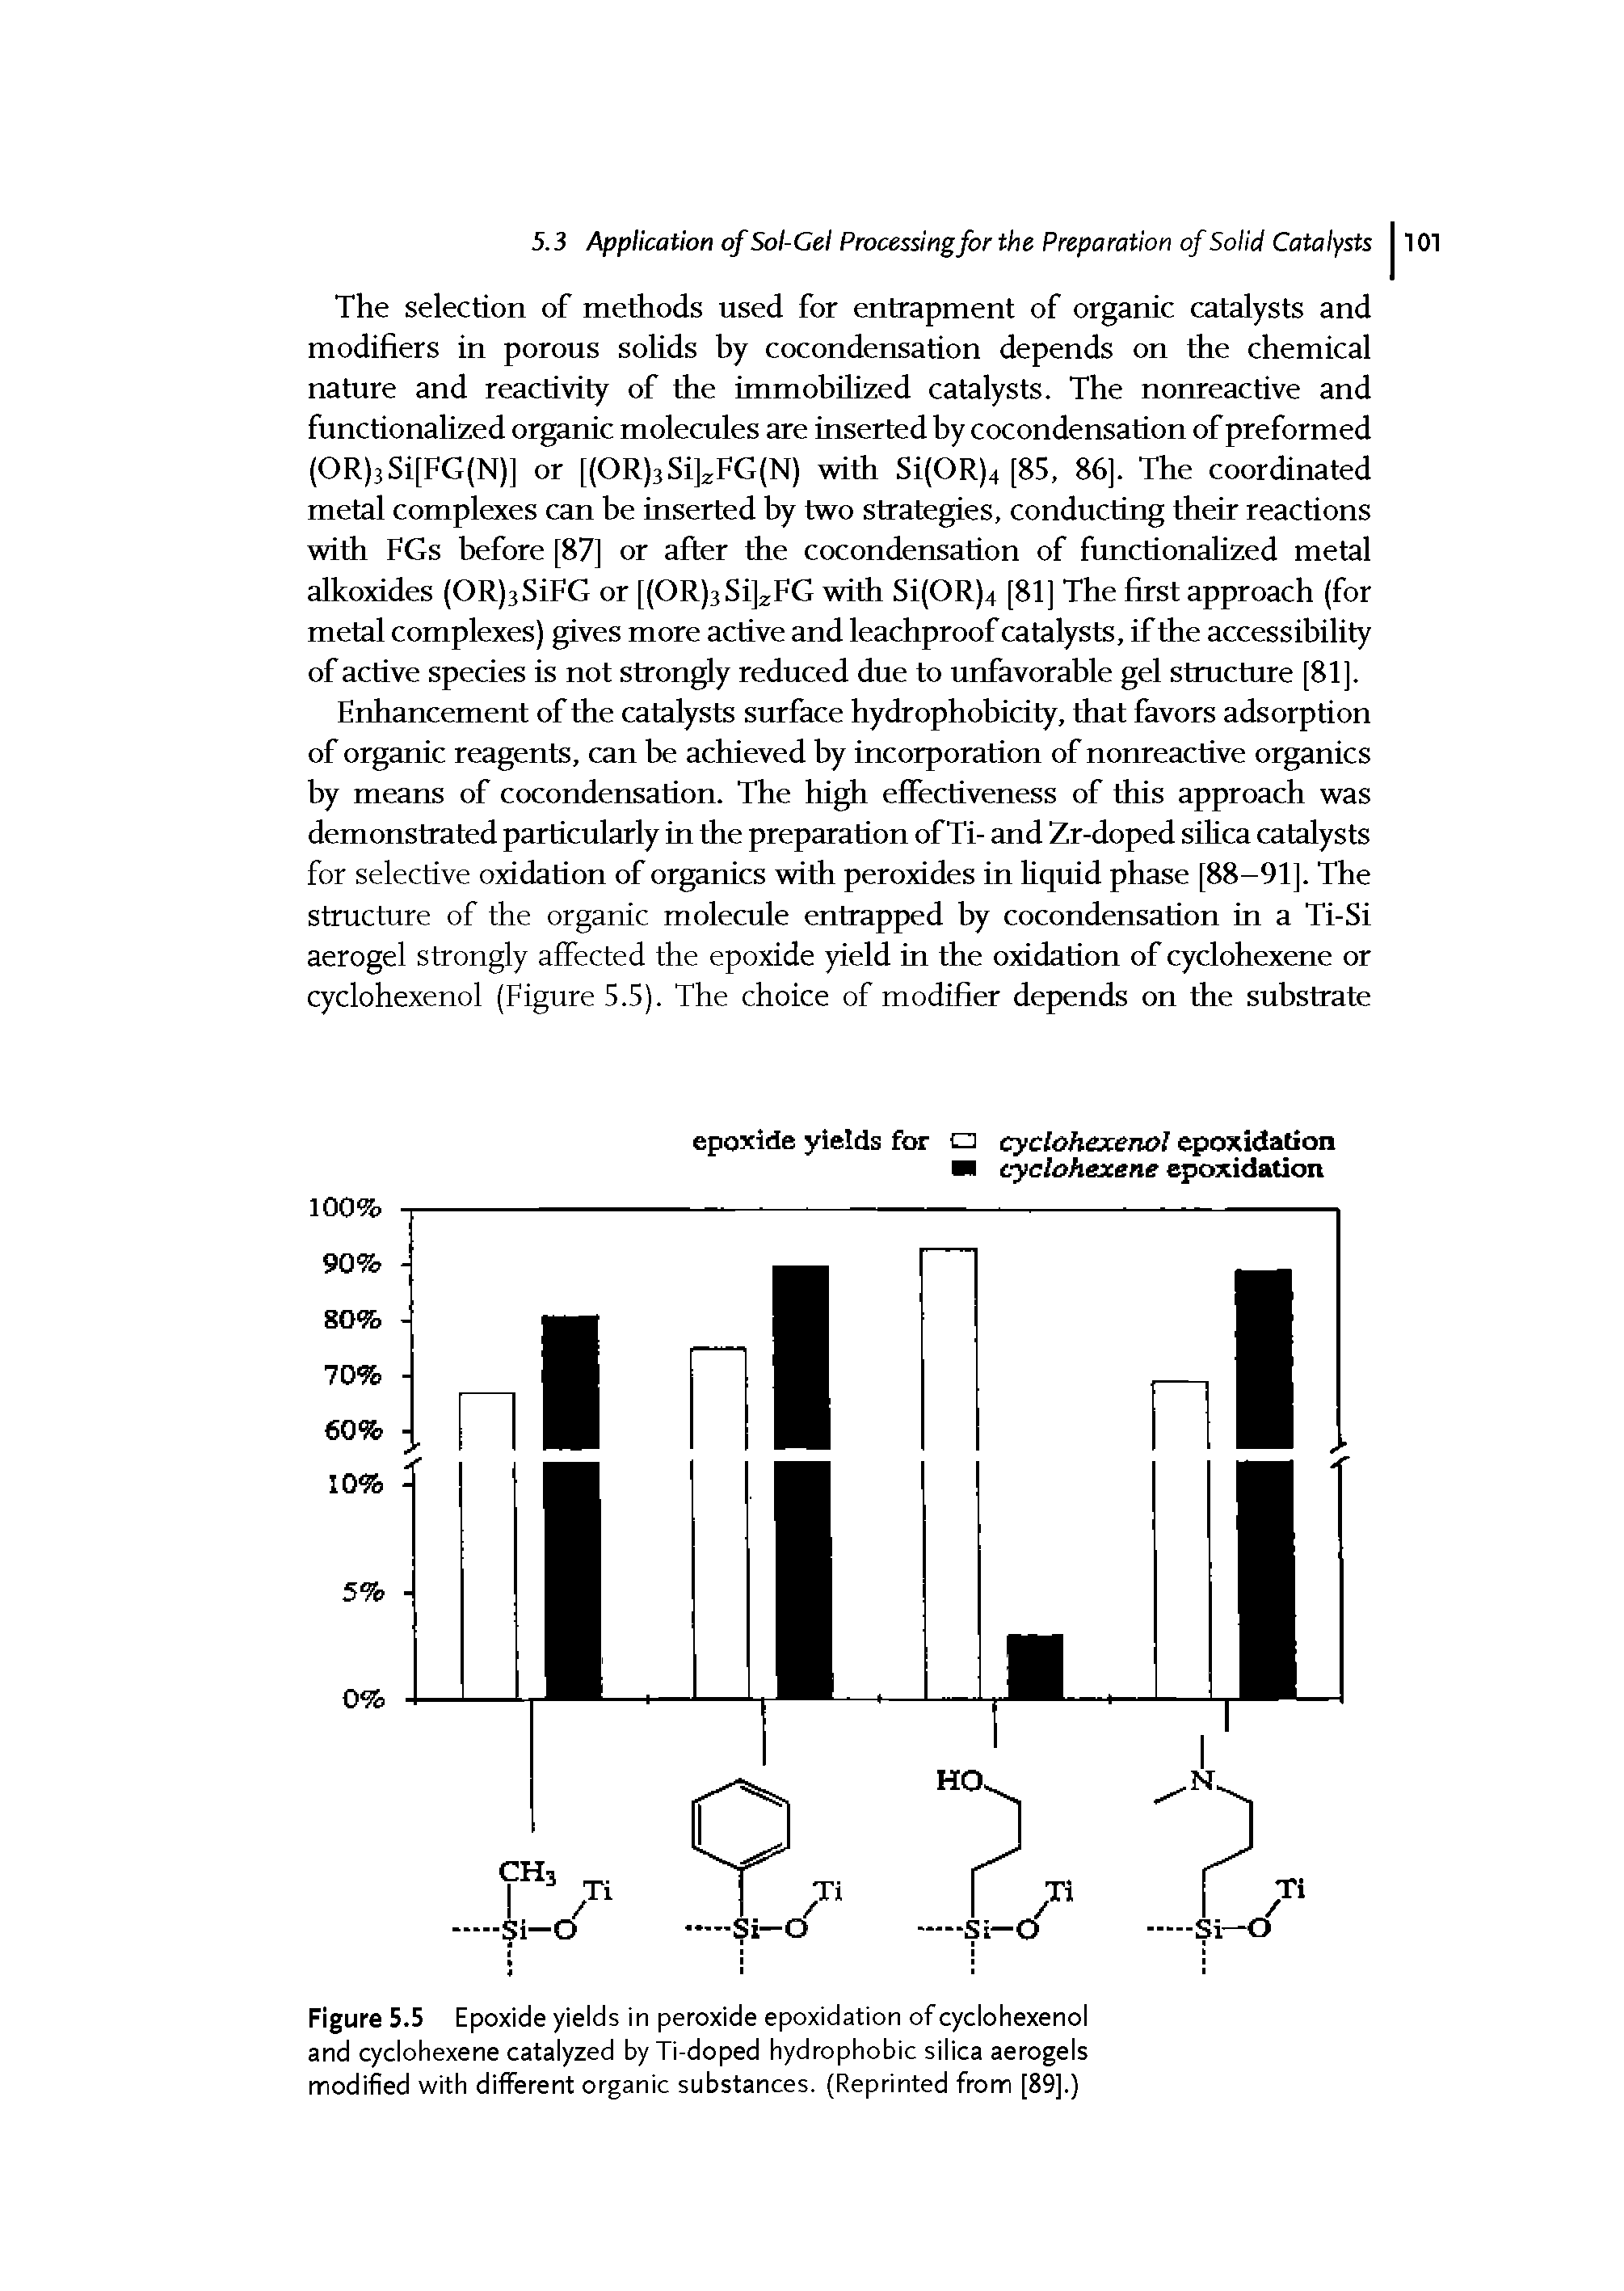 Figure 5.5 Epoxide yields in peroxide epoxidation of cyclohexenol and cyclohexene catalyzed byTi-doped hydrophobic silica aerogels modified with different organic substances. (Reprinted from [89].)...